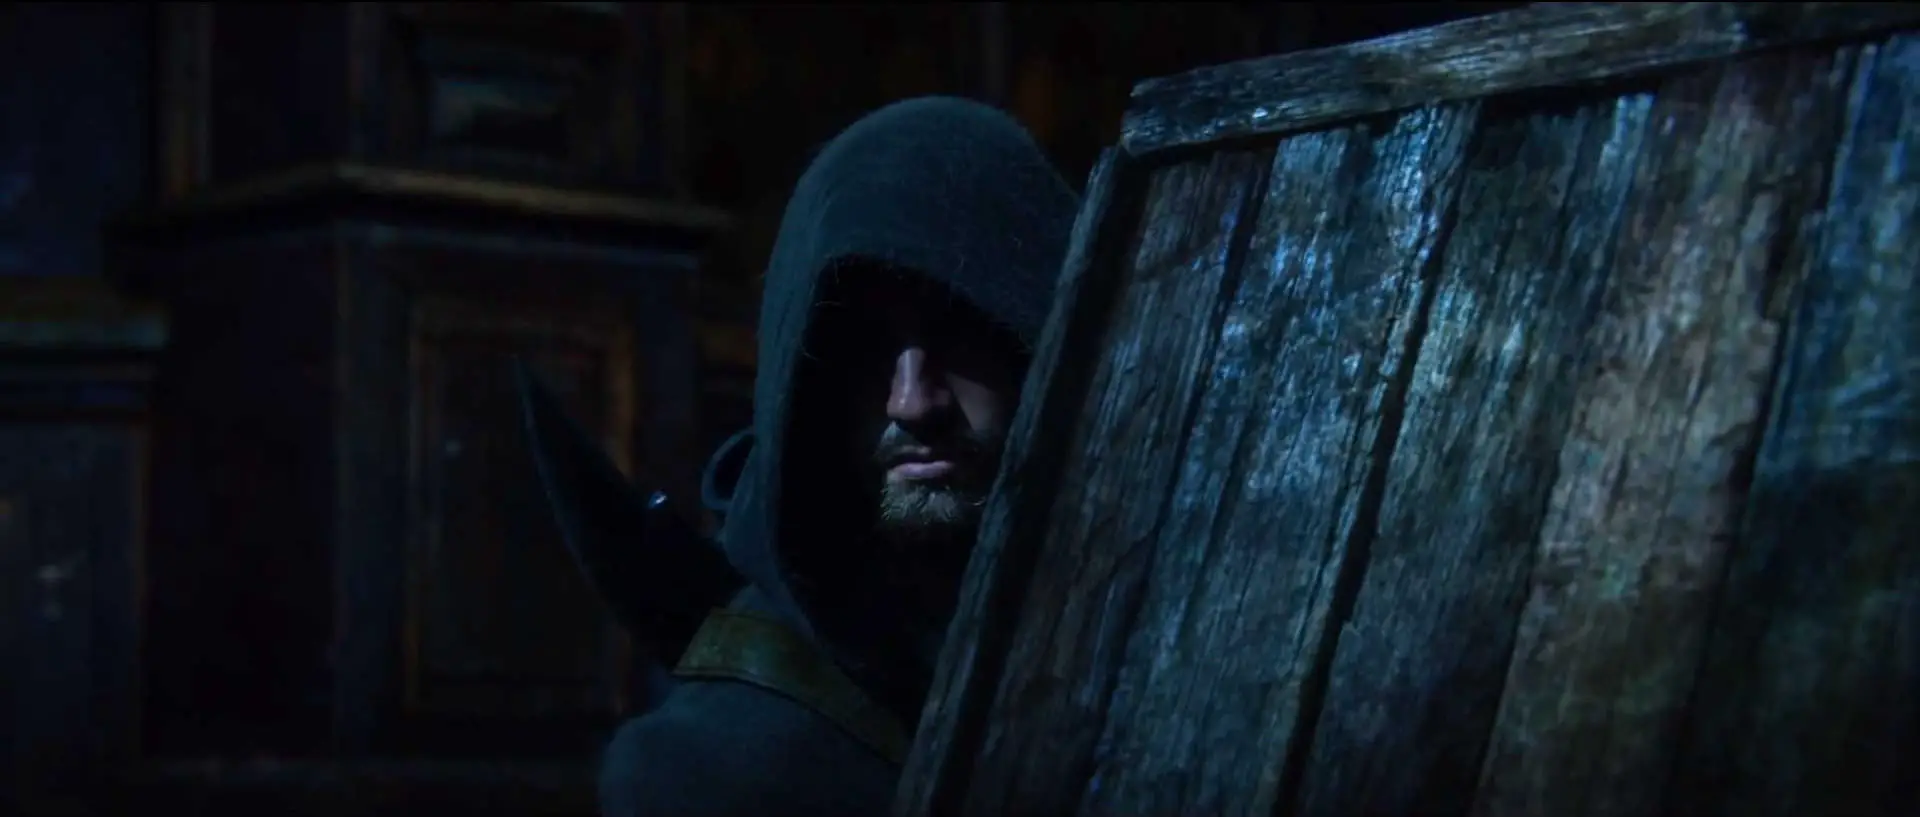 Assassin's Creed unity_dead_kings_01